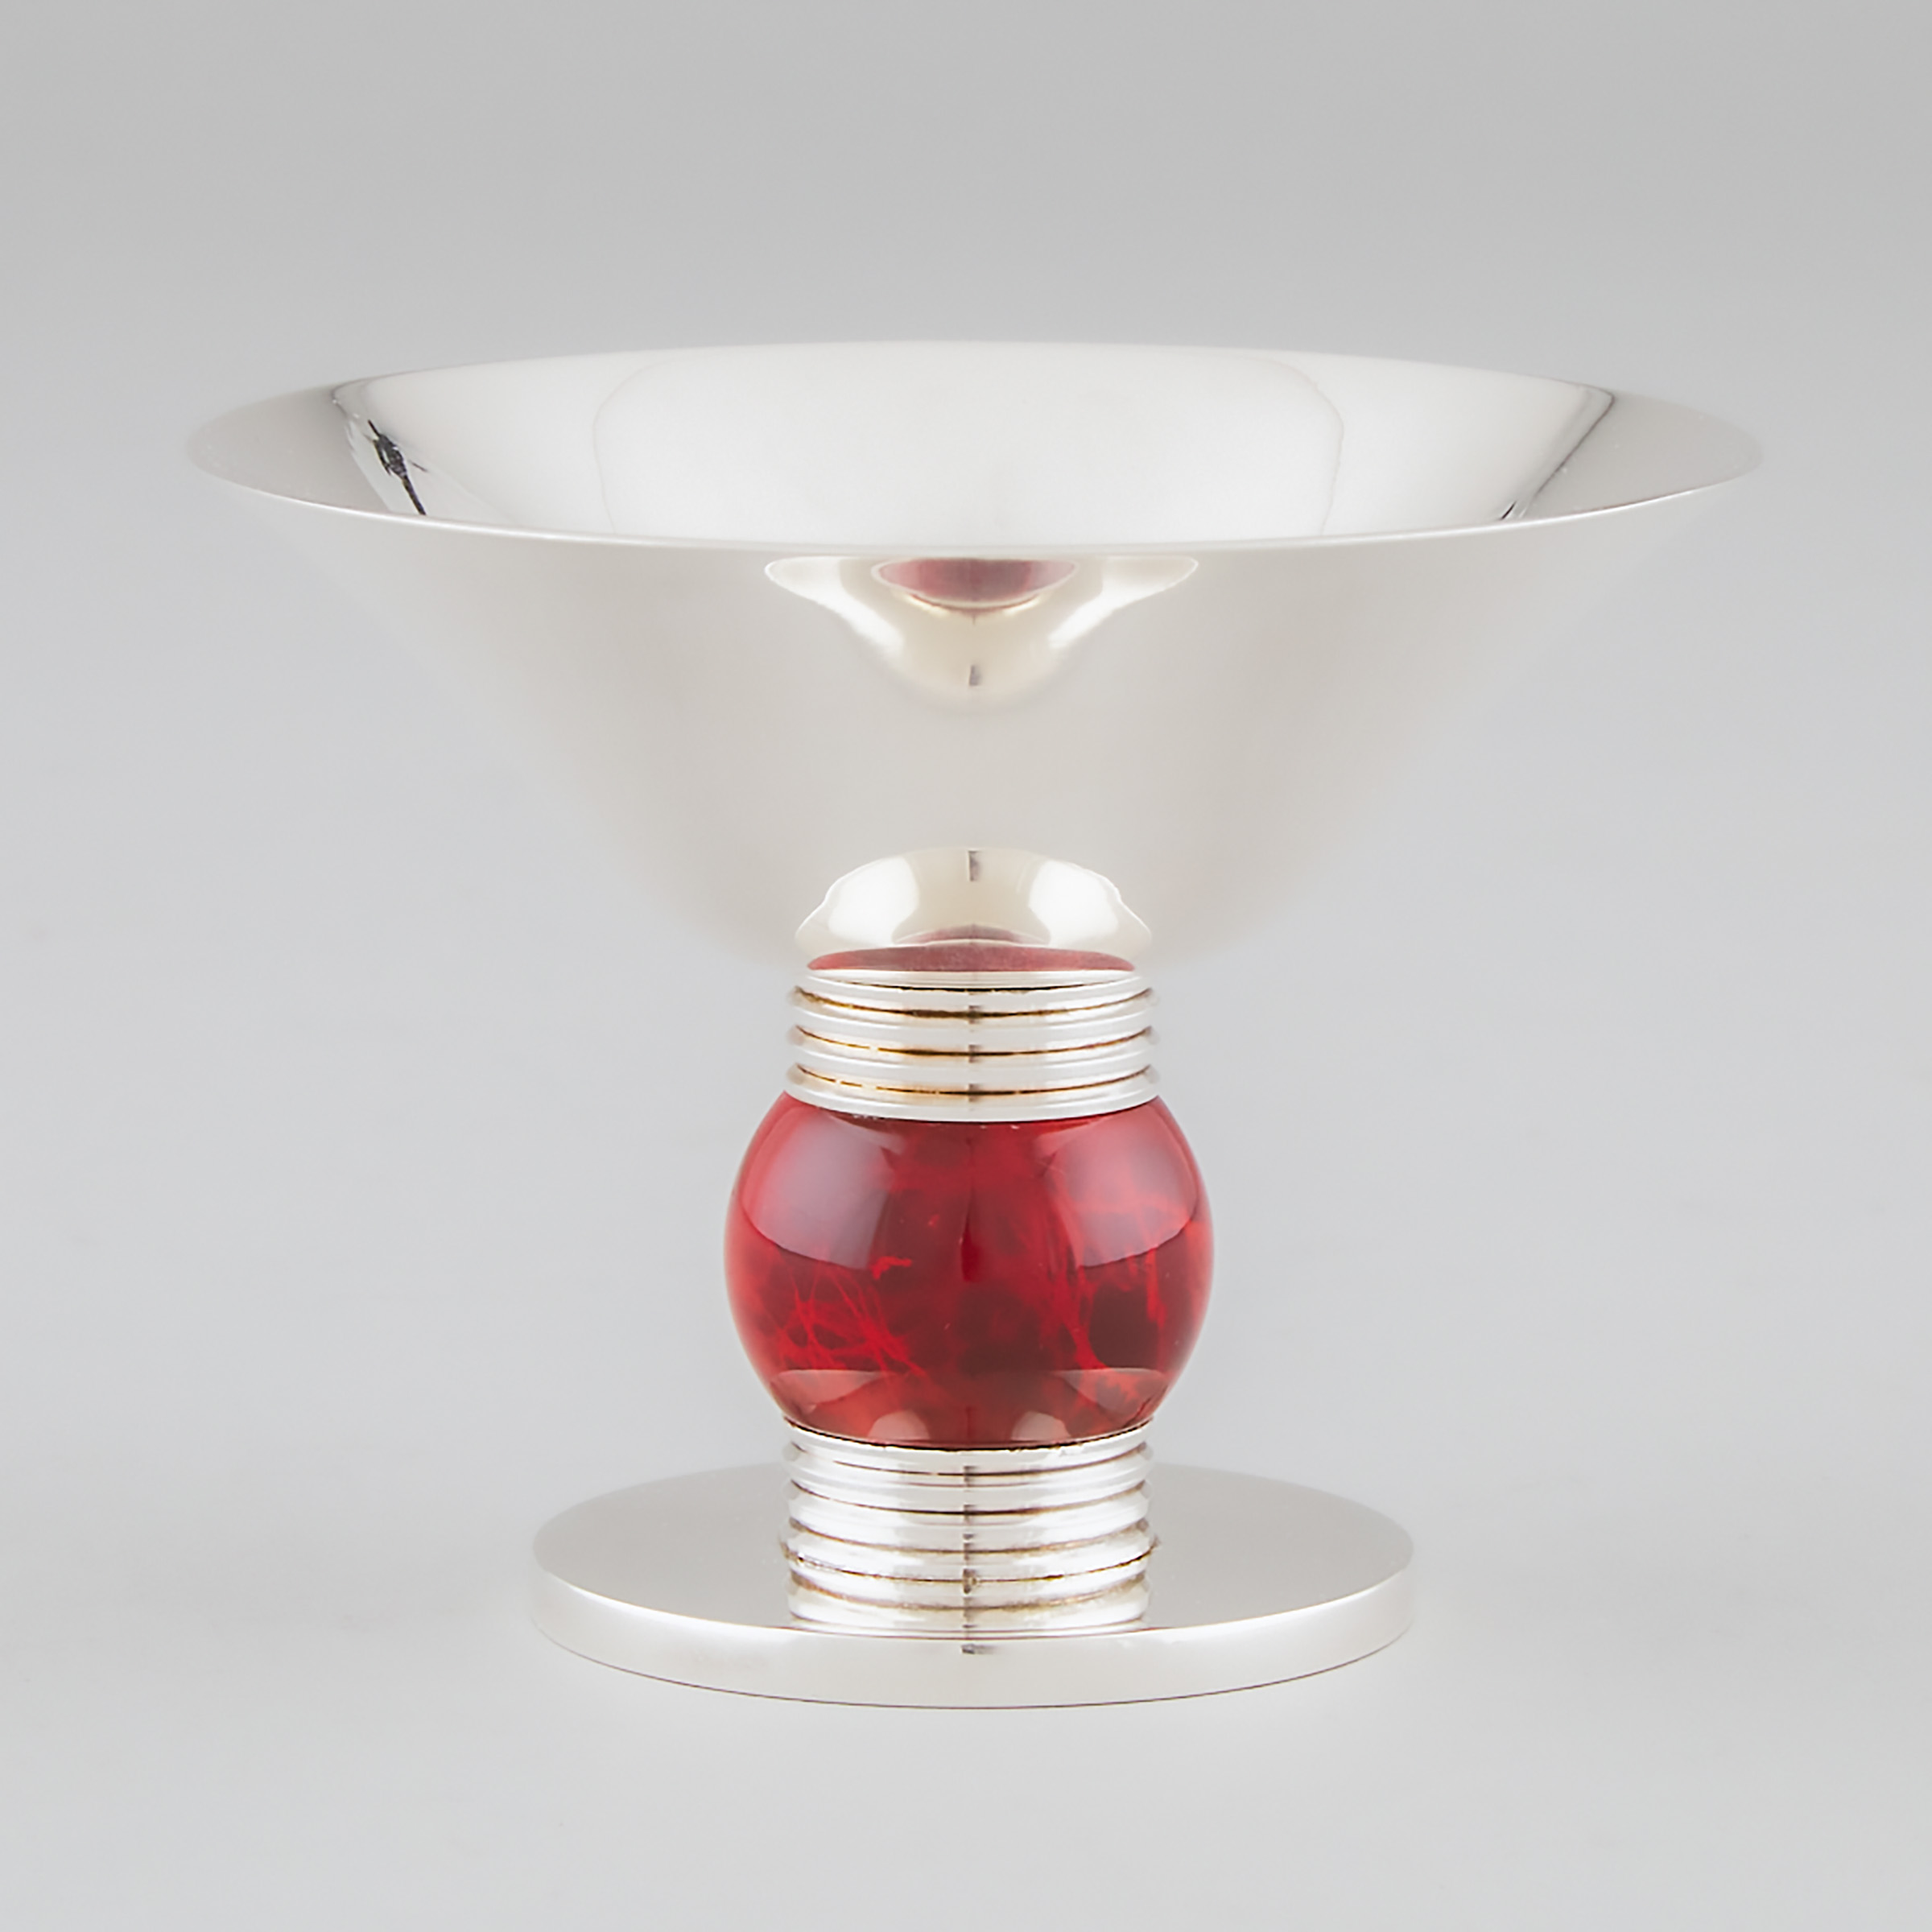 Small French Silver Plated Comport, Puiforcat, Paris, 20th century